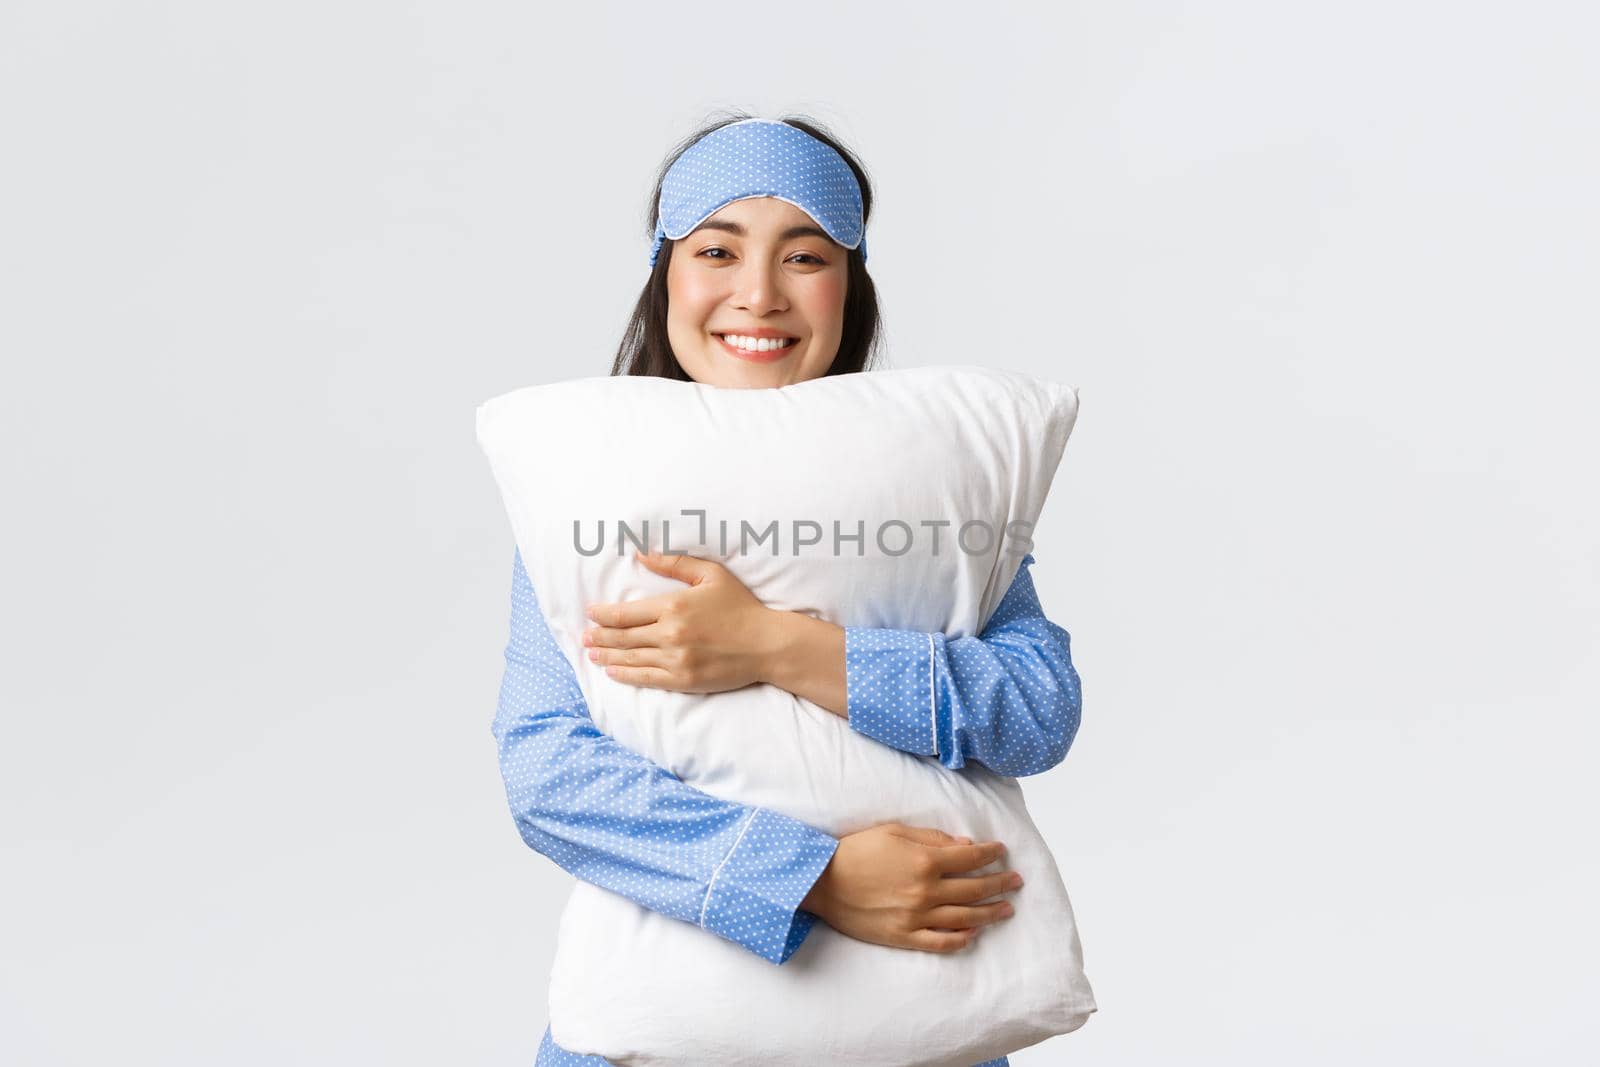 Smiling pleased asian girl in sleeping mask and pajamas hugging soft and comfortable pillow with satisfied relaxed expression, getting to bed, feeling cozy over white background.